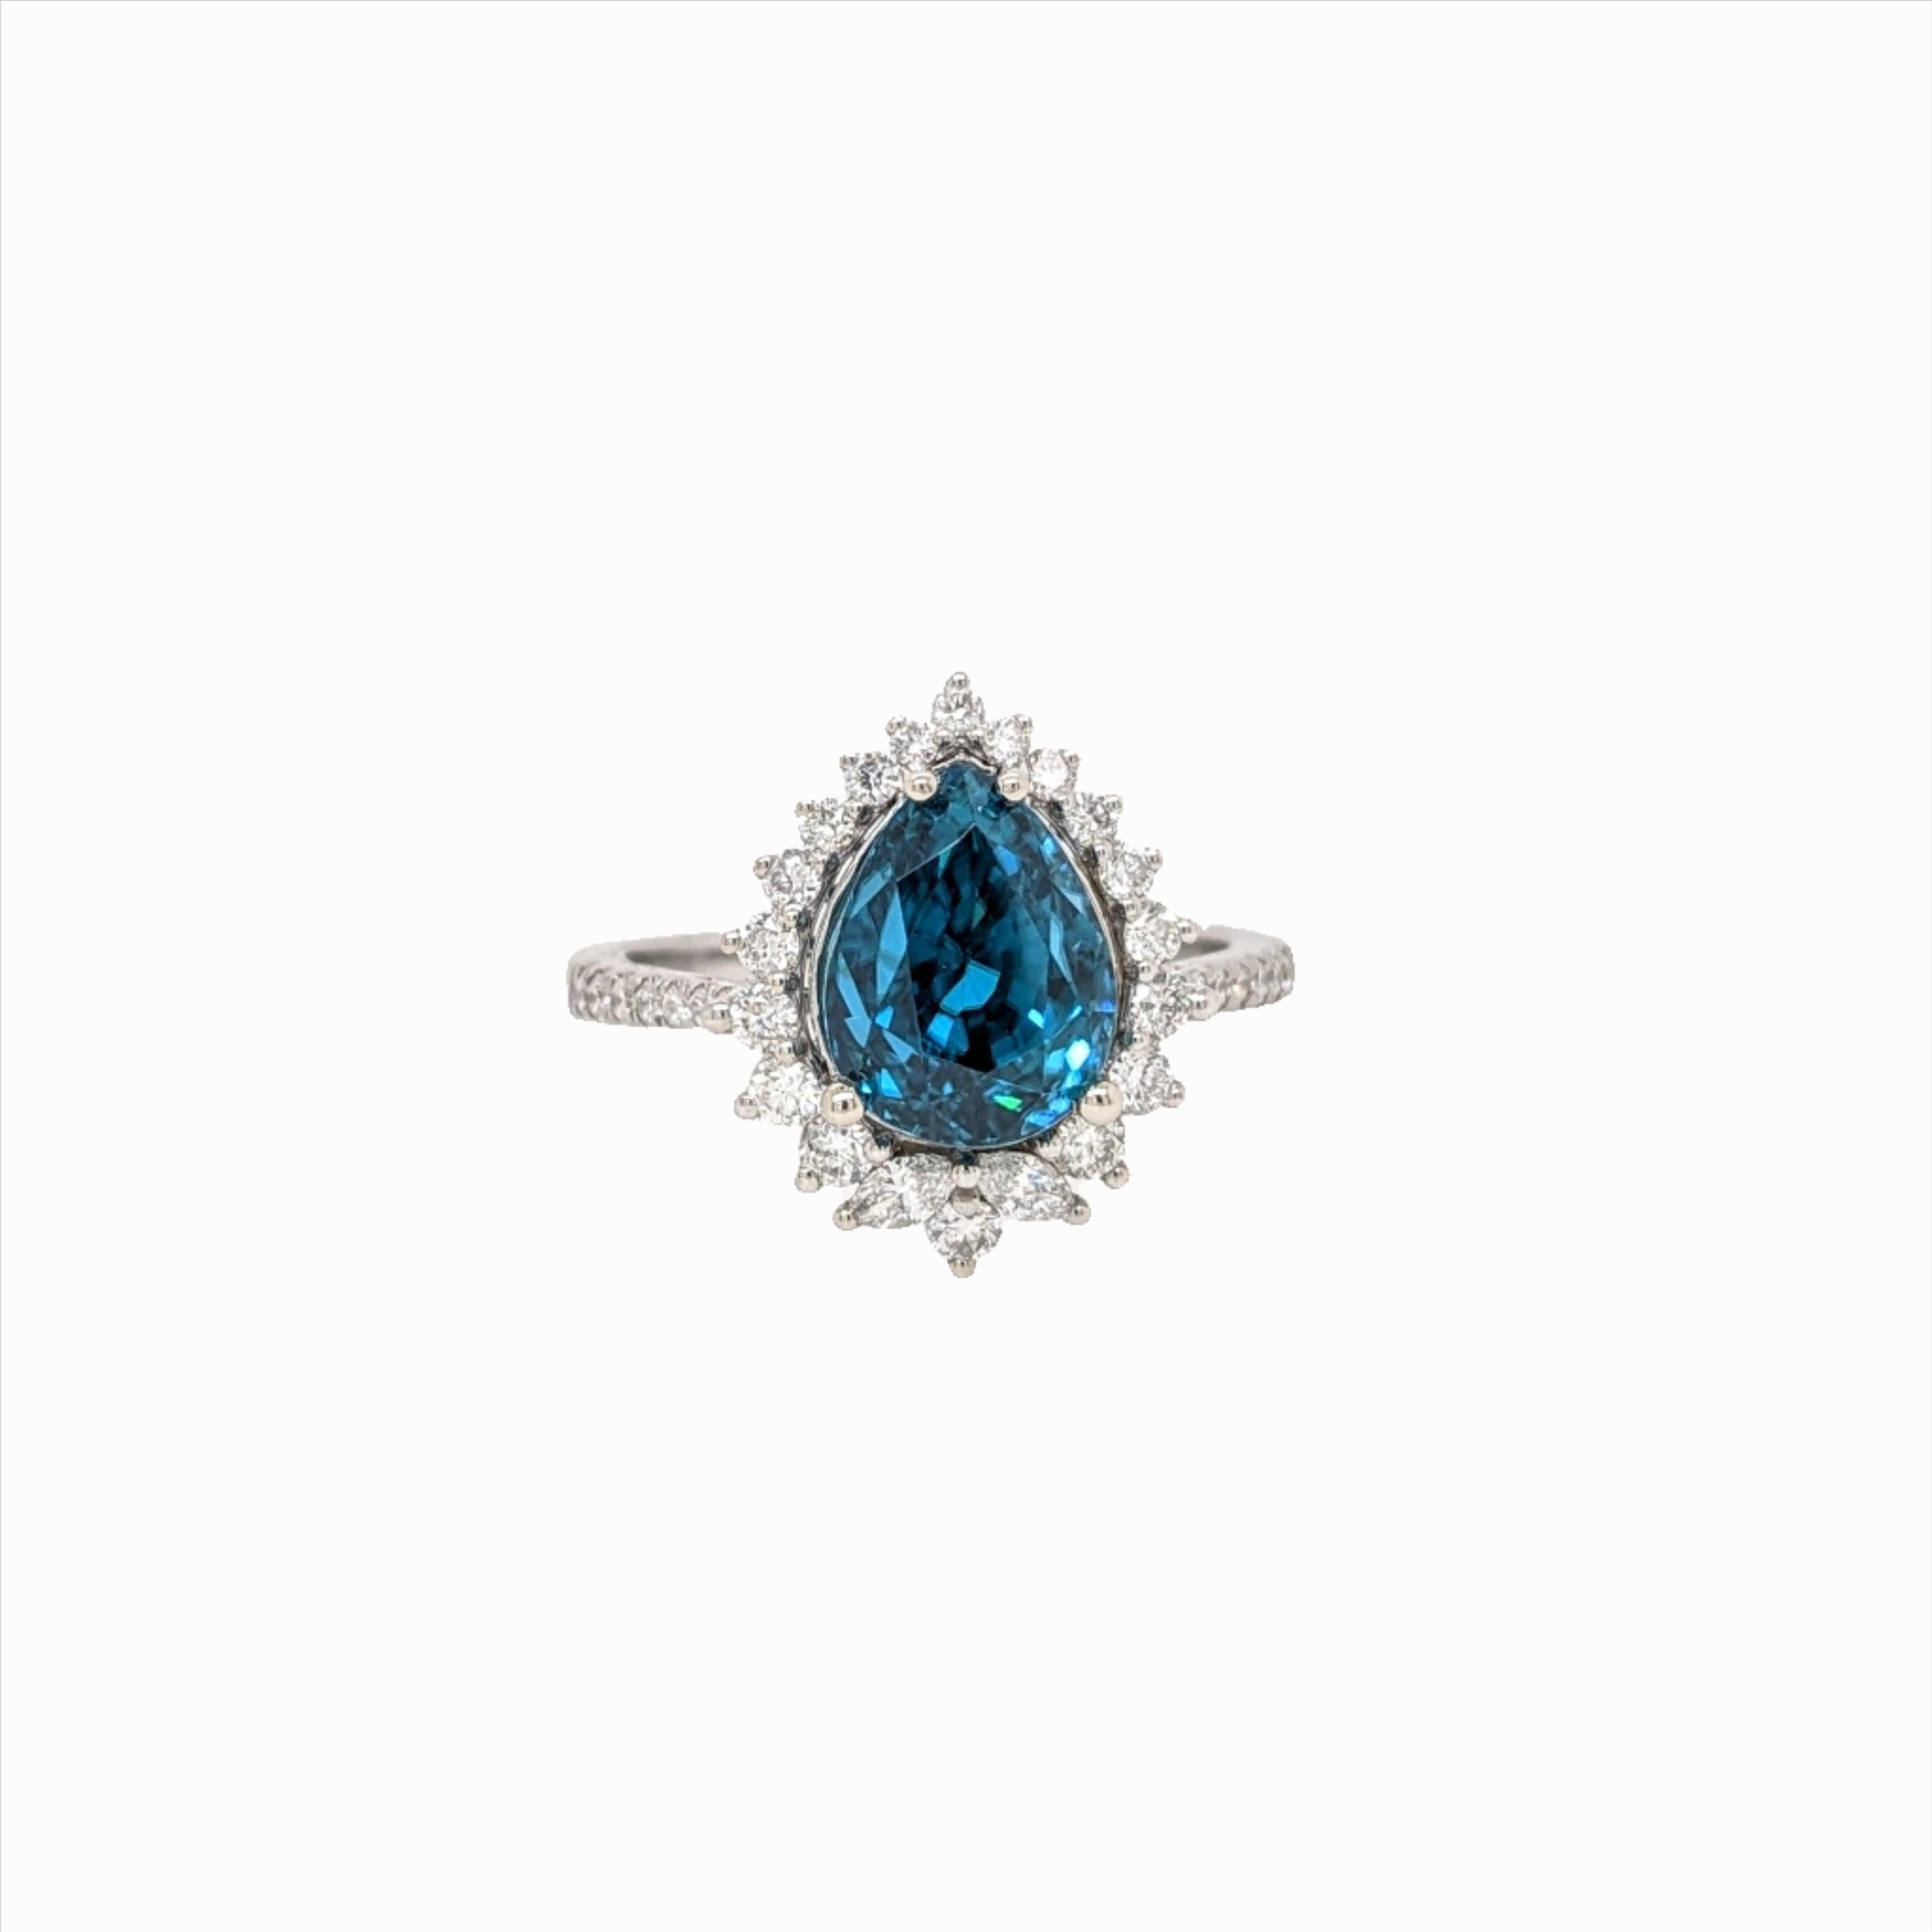 5ct Blue Zircon Ring w Natural Diamonds in Solid 14K White Gold Pear 10x8mm